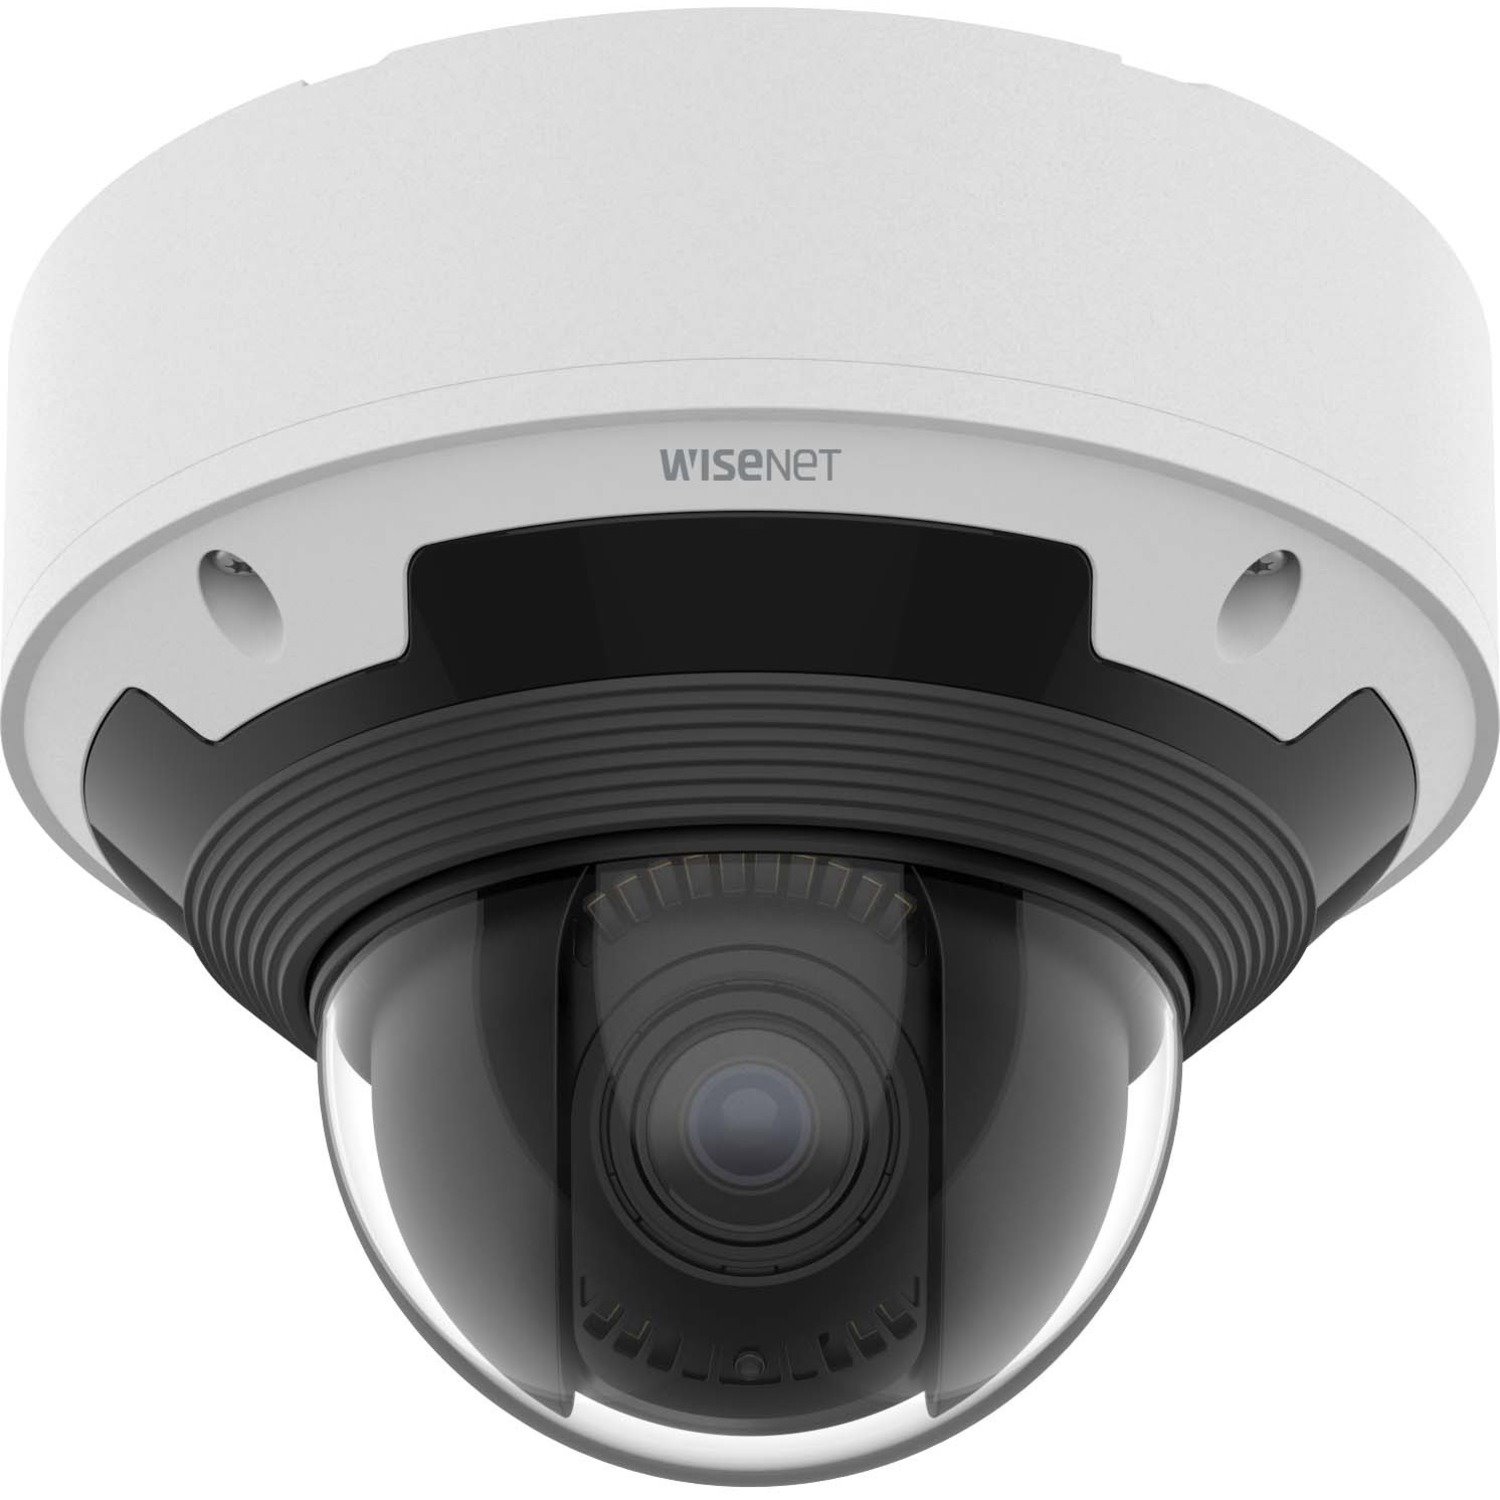 Wisenet XNV-6083RZ 2 Megapixel Outdoor Full HD Network Camera - Colour - Dome - White